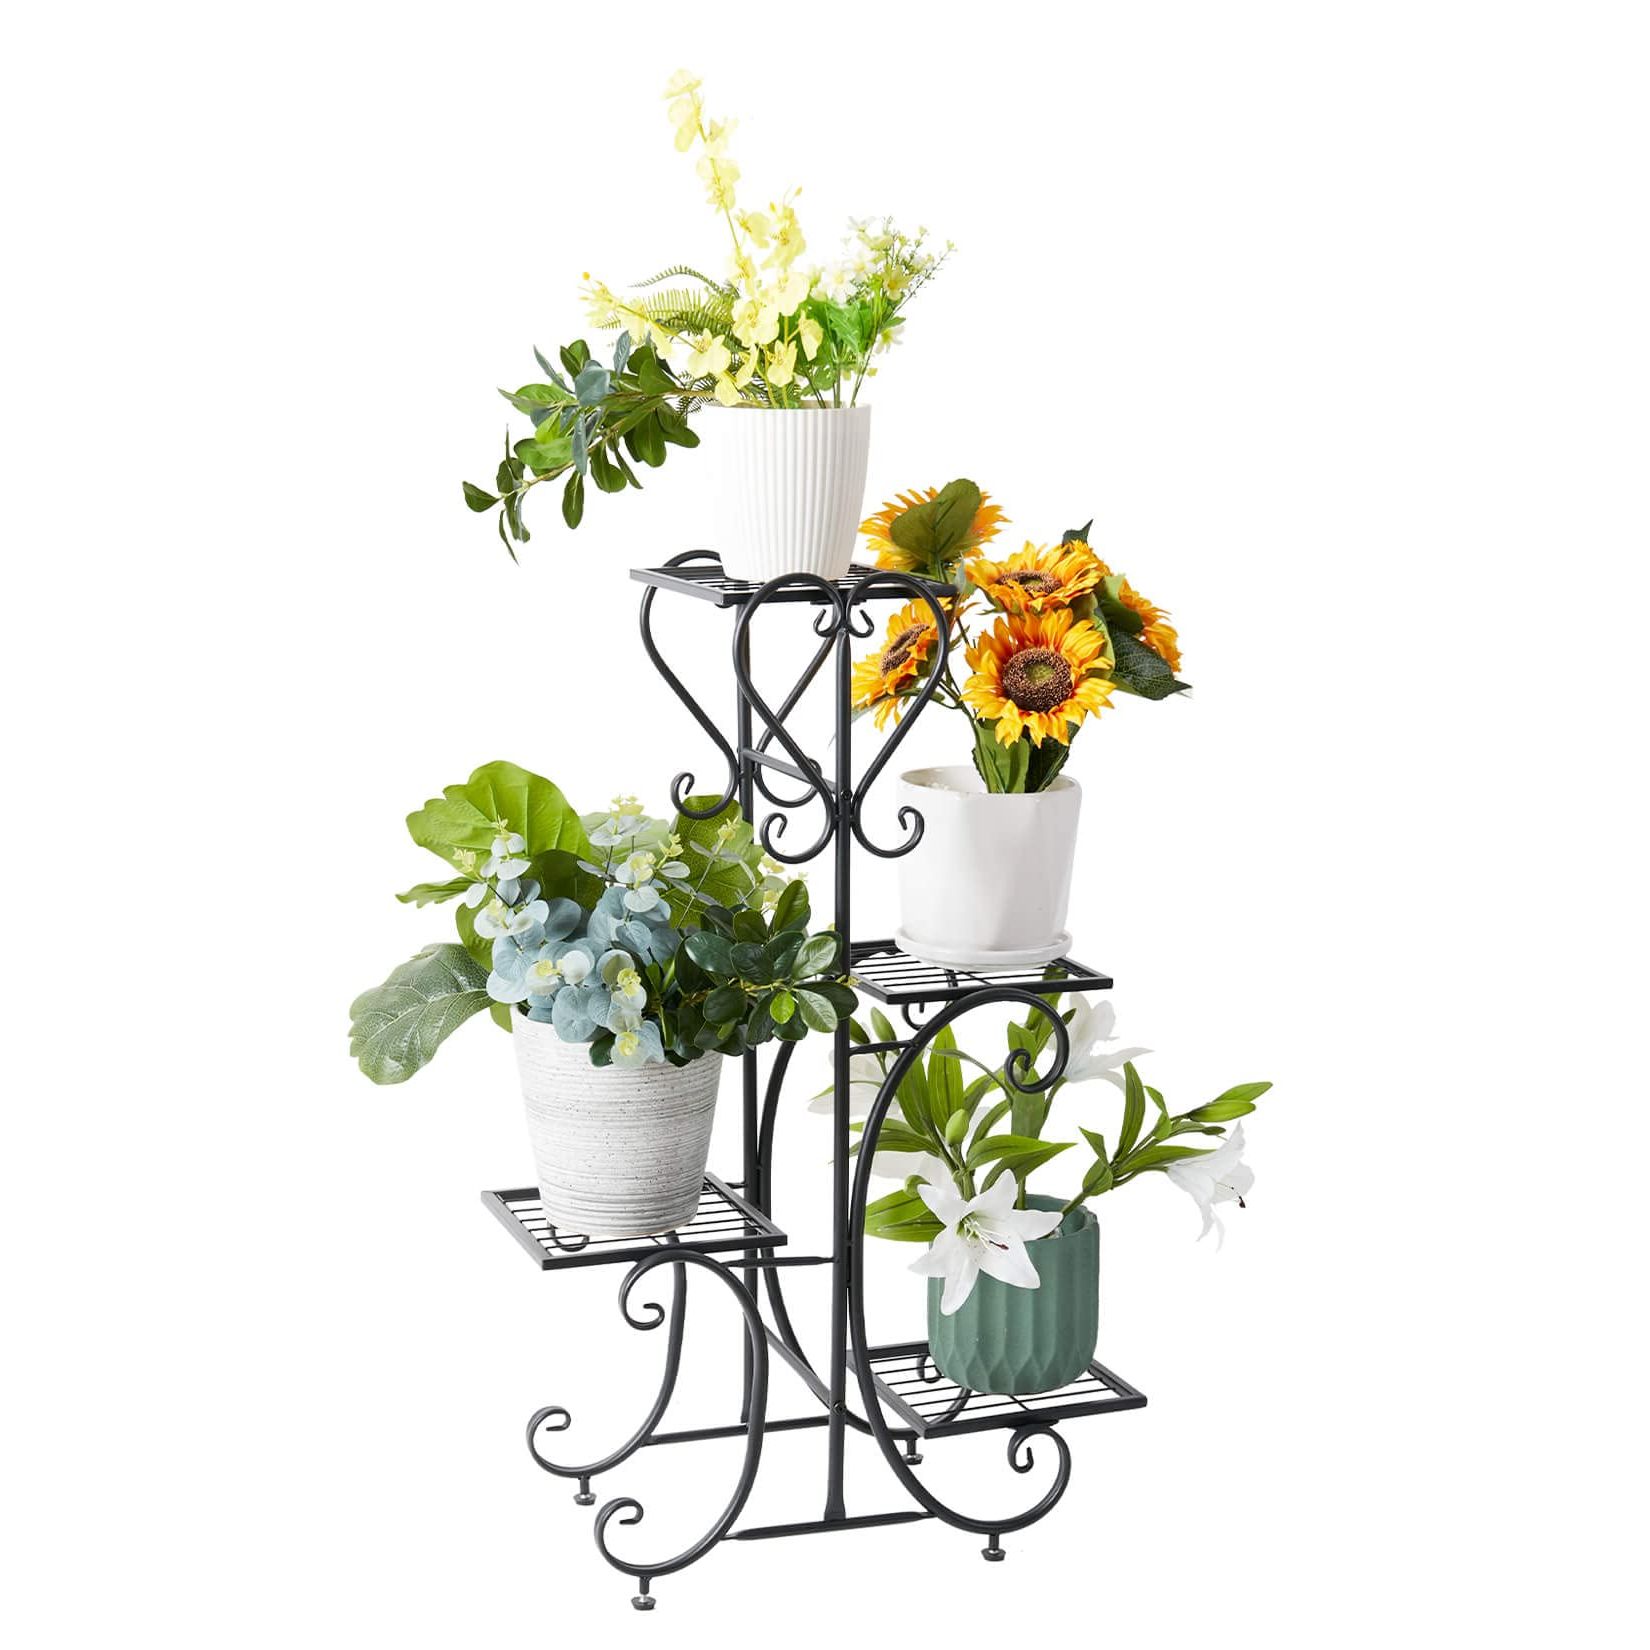 Amazon : Unho Metal Plant Stand Black: 4 Tier Flower Pot Display Rack  With Potted Planter Shelves Indoor Storage Shelf Holder For Balcony Living  Room Patio Garden Entryway Décor : Patio, Lawn Pertaining To Most Recently Released Four Tier Metal Plant Stands (View 5 of 10)